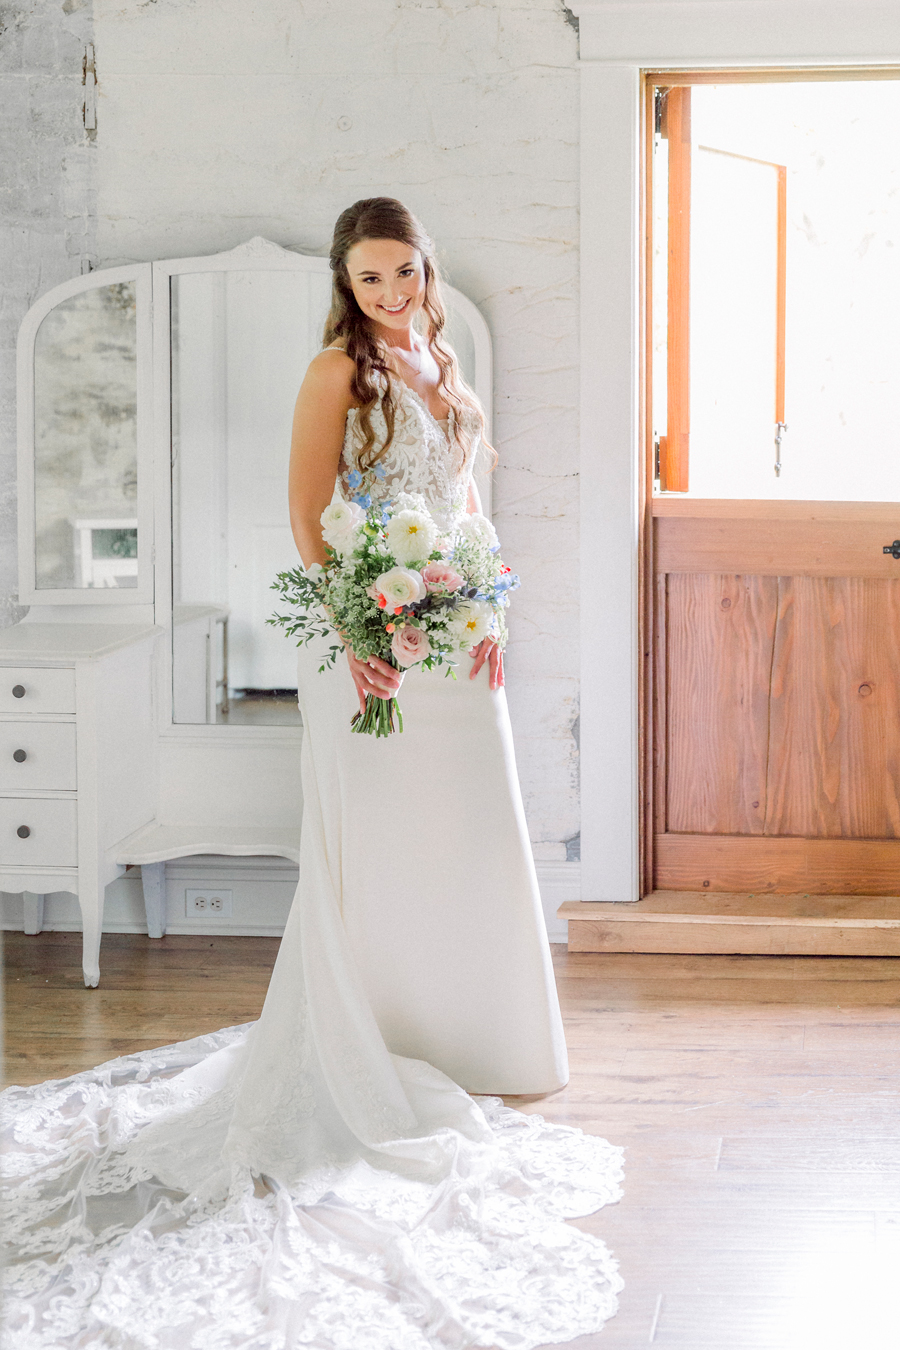 A bride takes a portrait in the bridal cottage of Wildcliff Wedding and events.